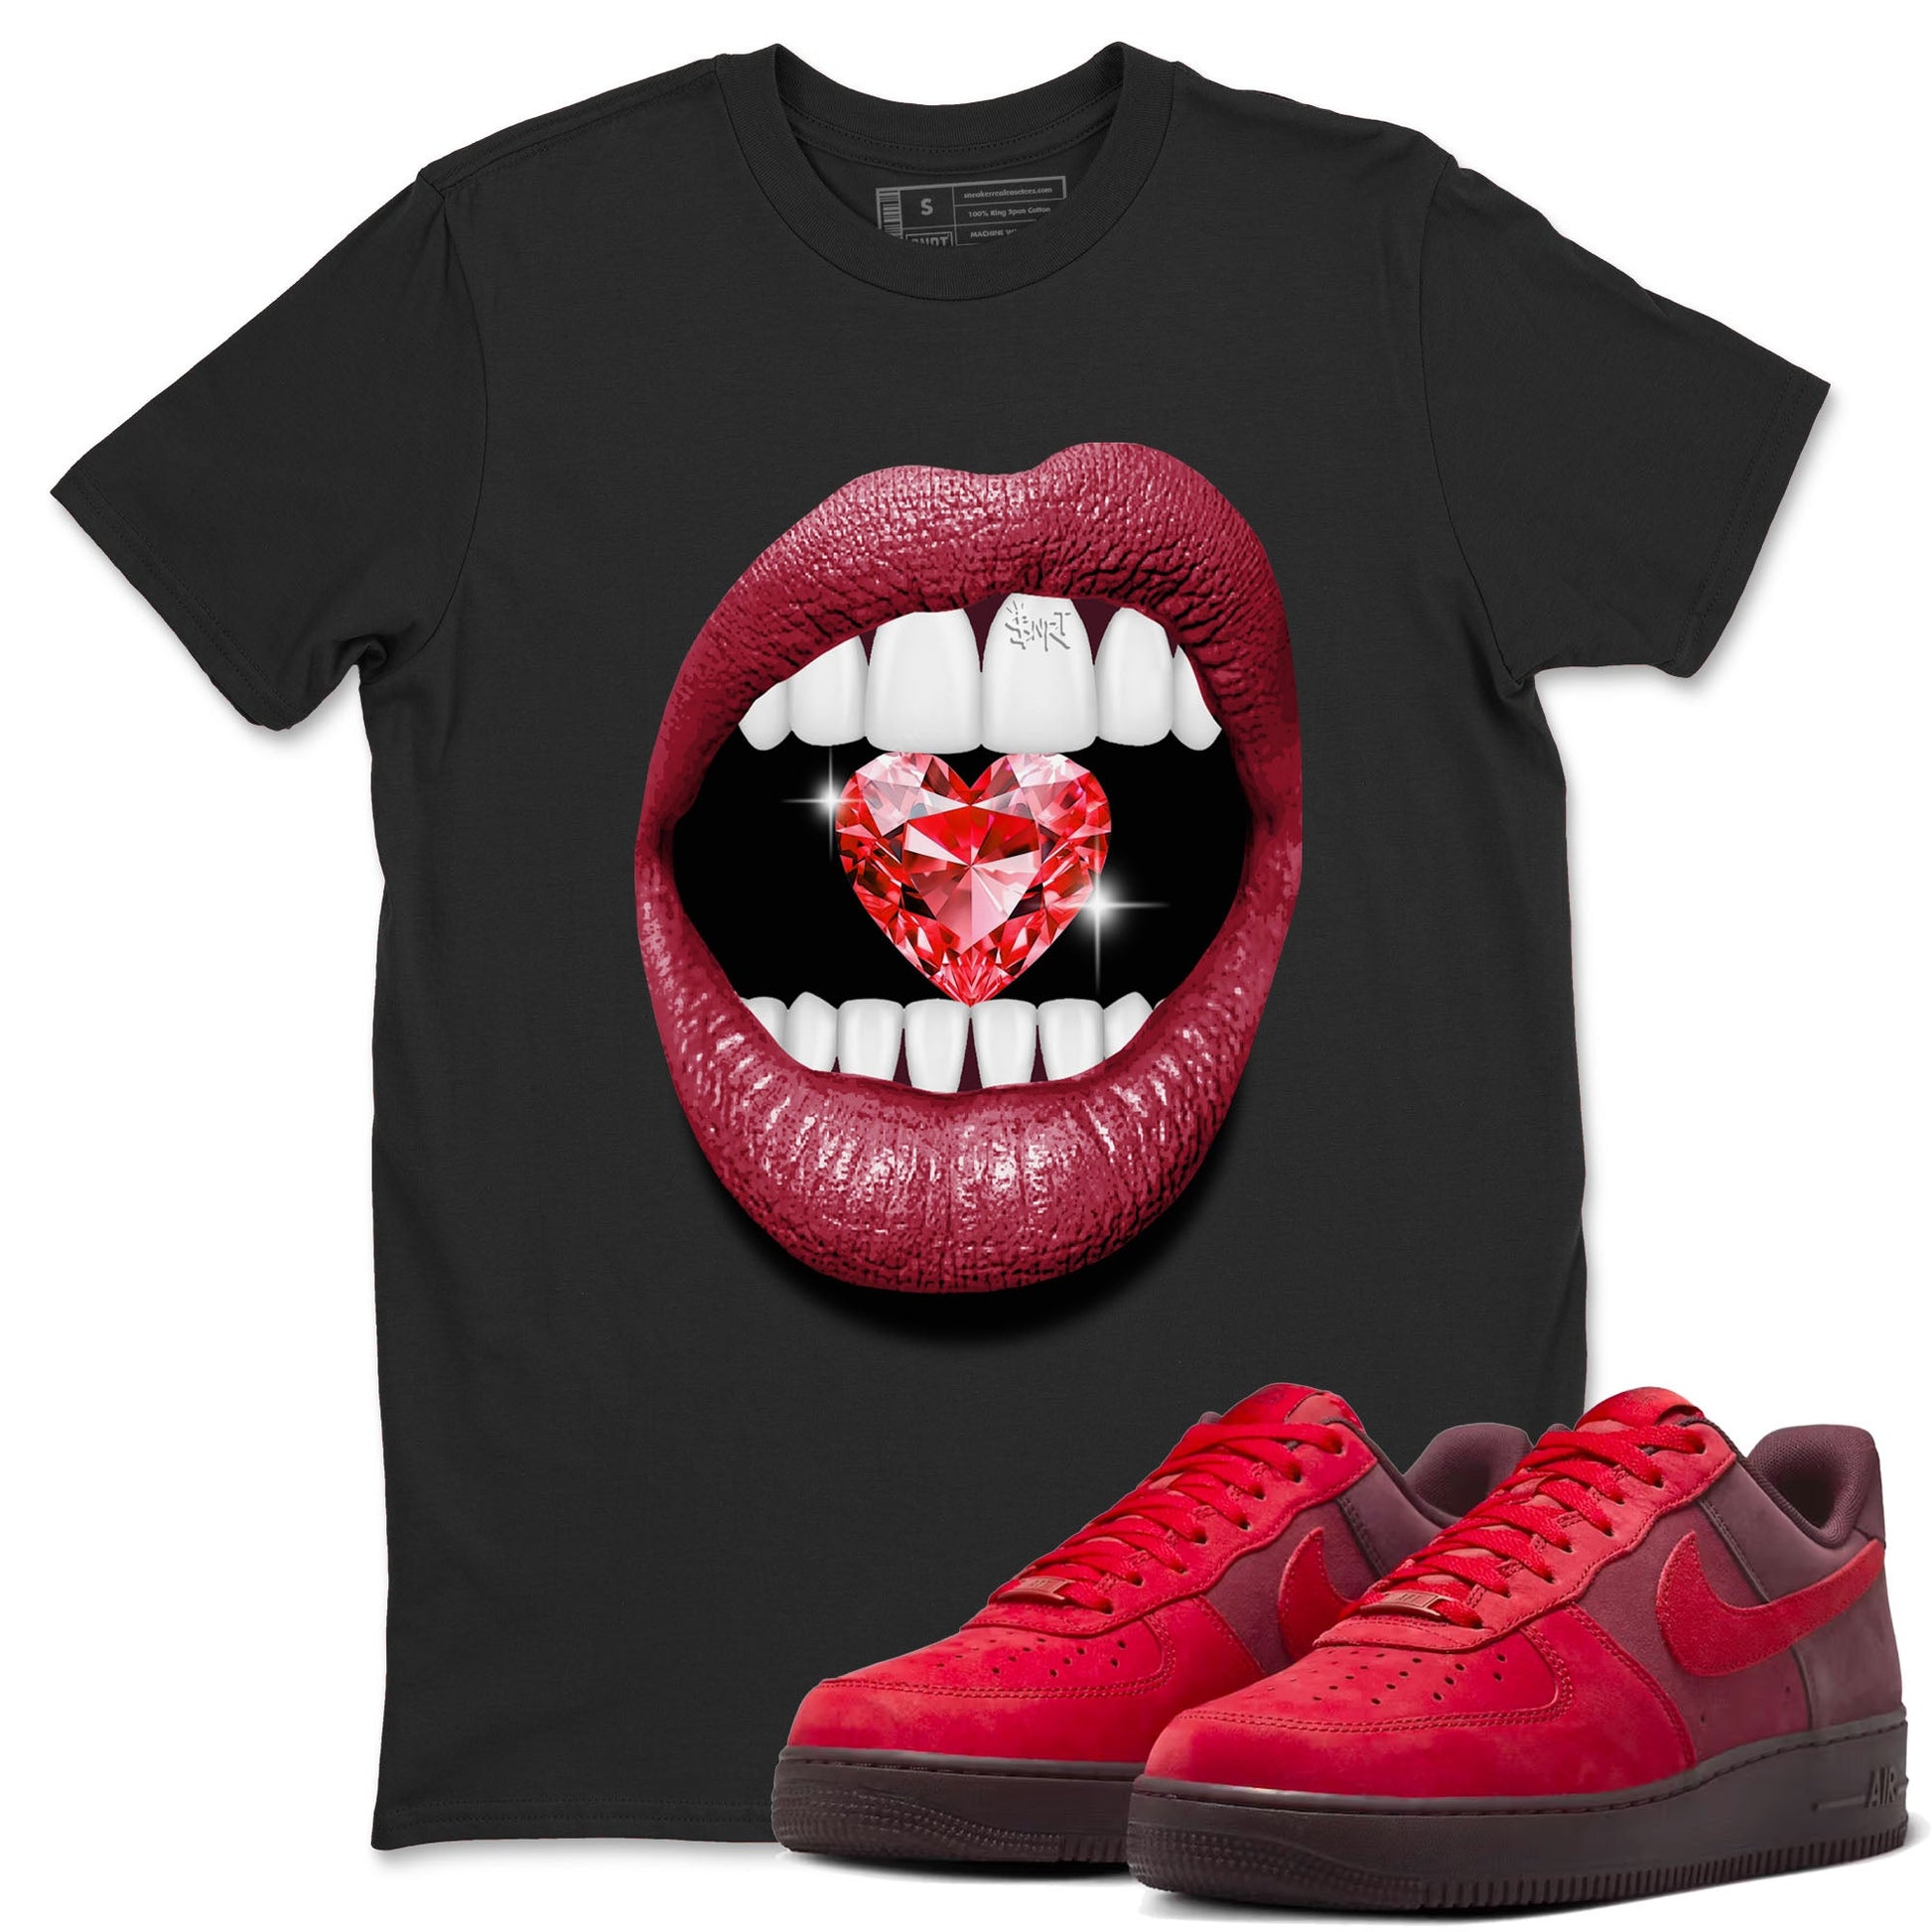 Lips Heart Diamond sneaker match tees to Special Valentine's Day street fashion brand for shirts to match Jordans SNRT Sneaker Tees Air Force 1 Valentines Day unisex t-shirt Black 1 unisex shirt